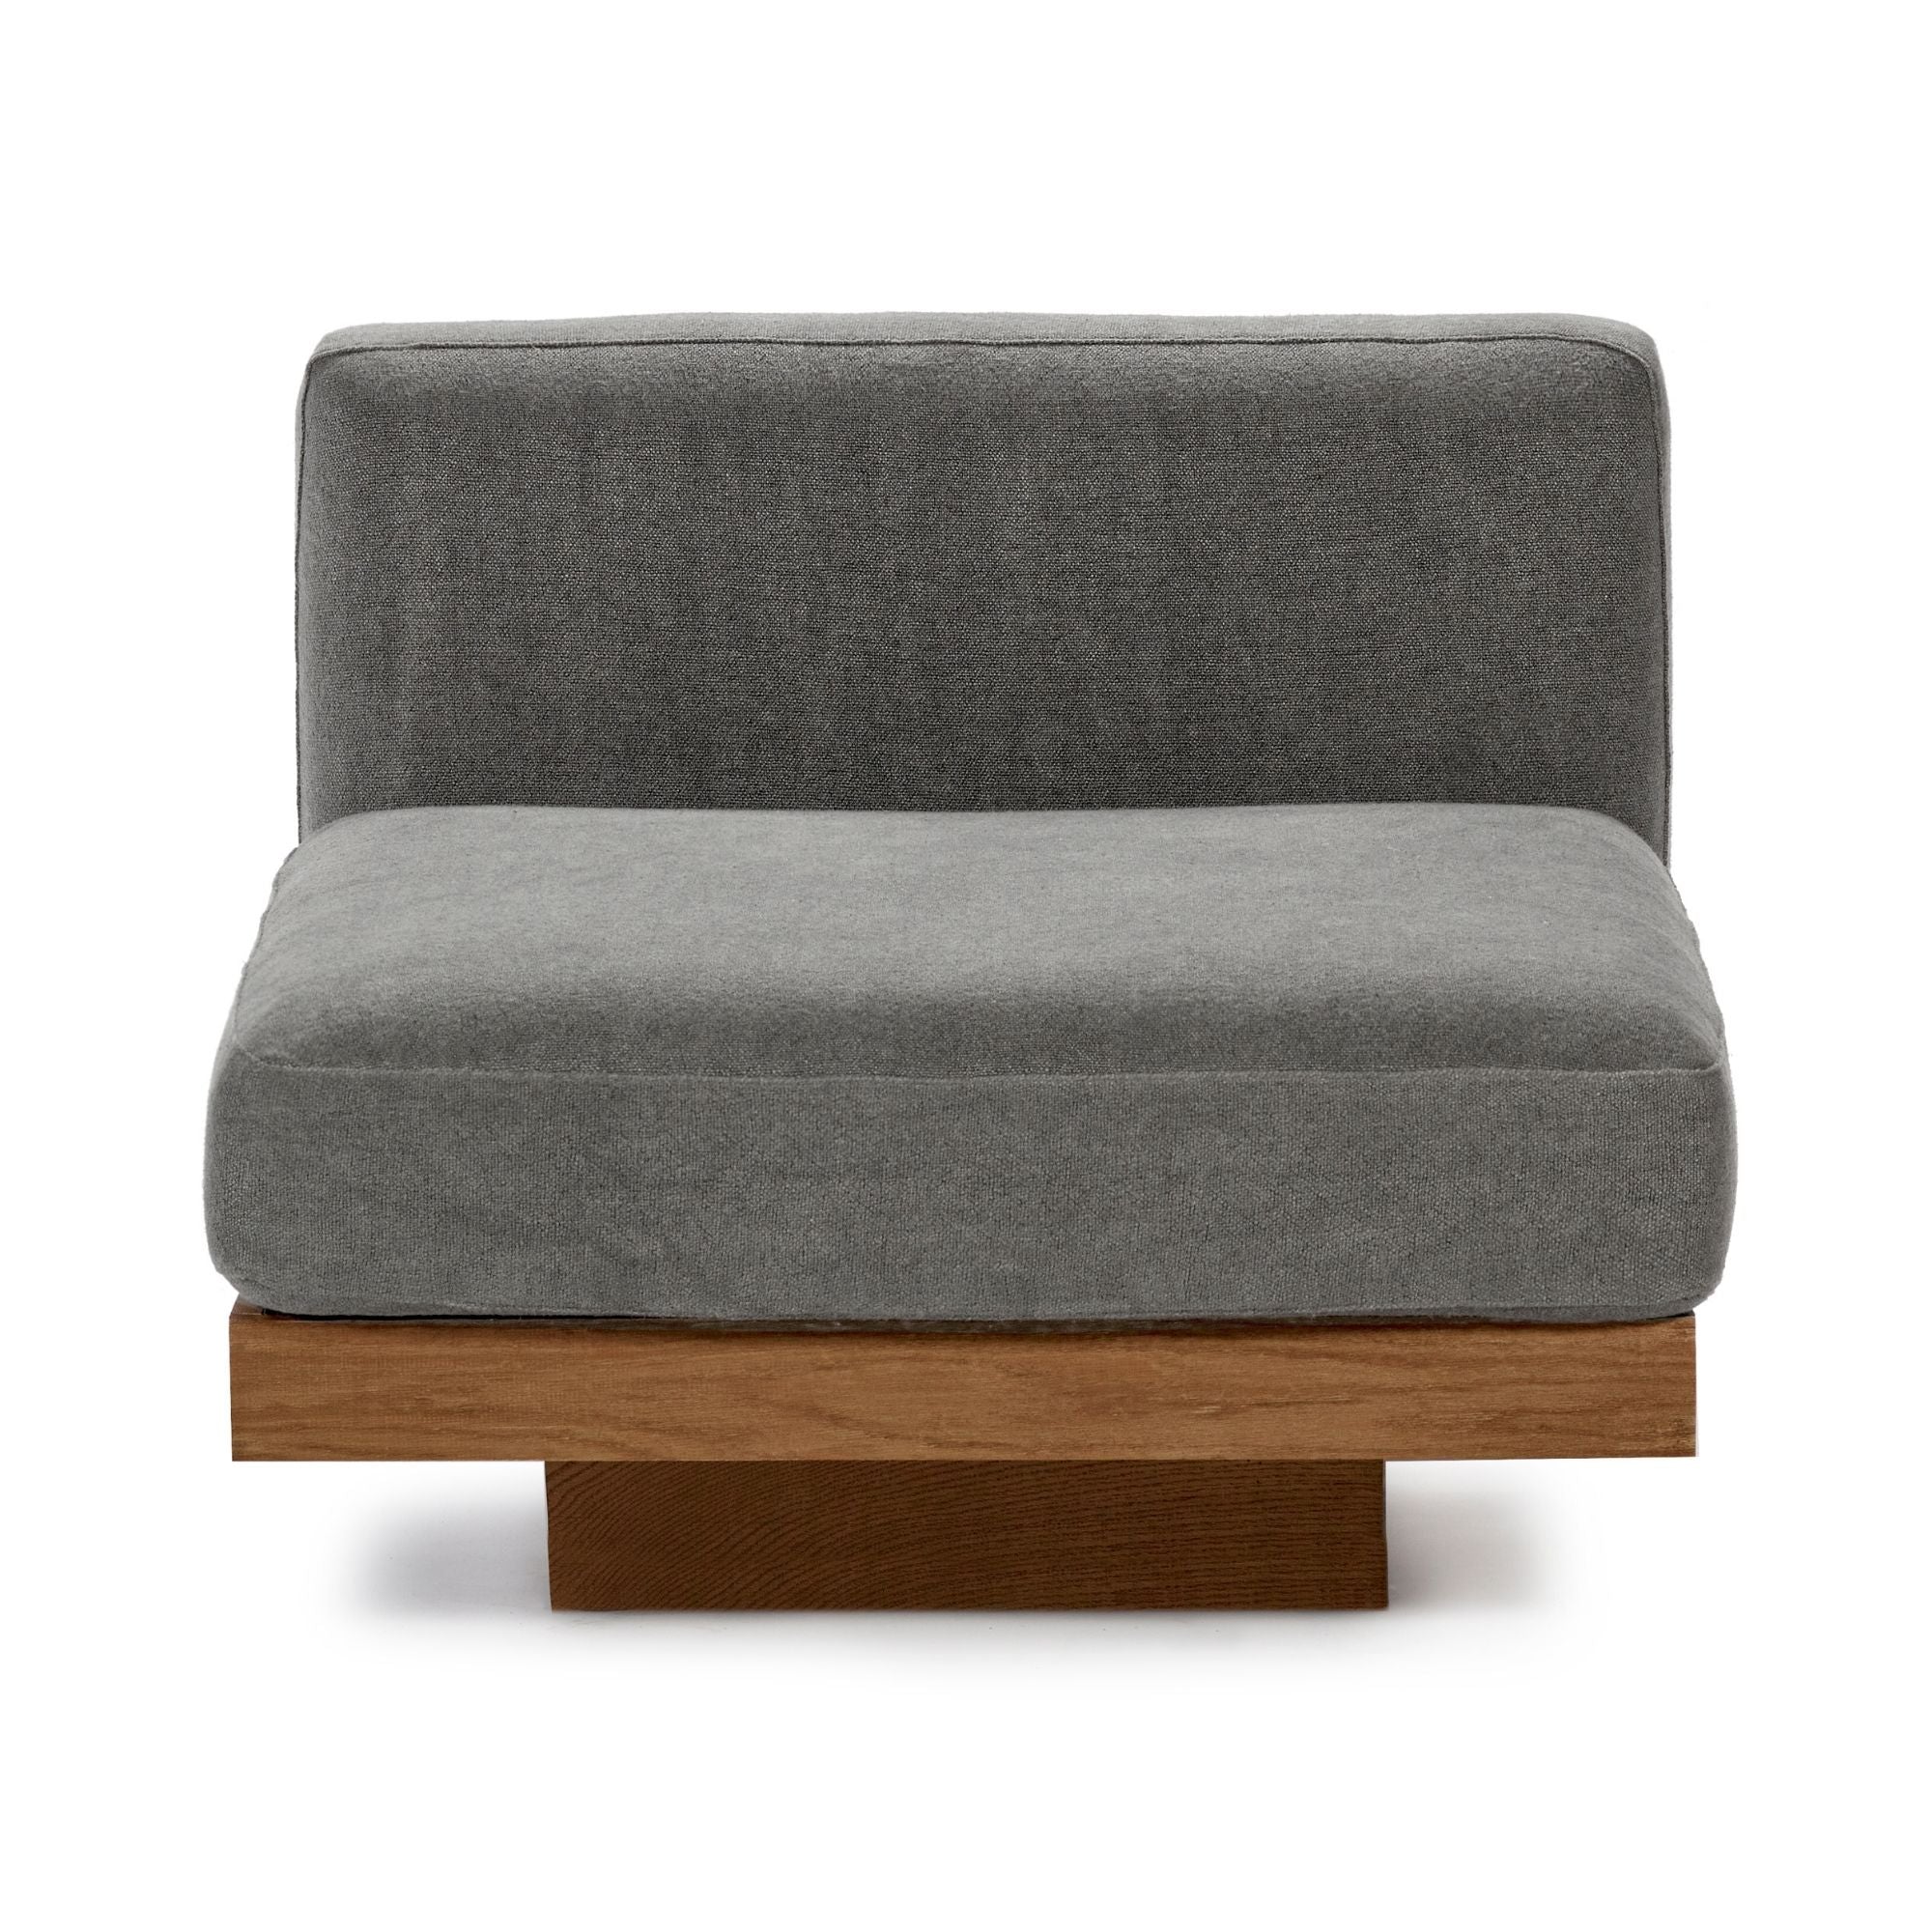 Rudolph Lounge Chair - THAT COOL LIVING